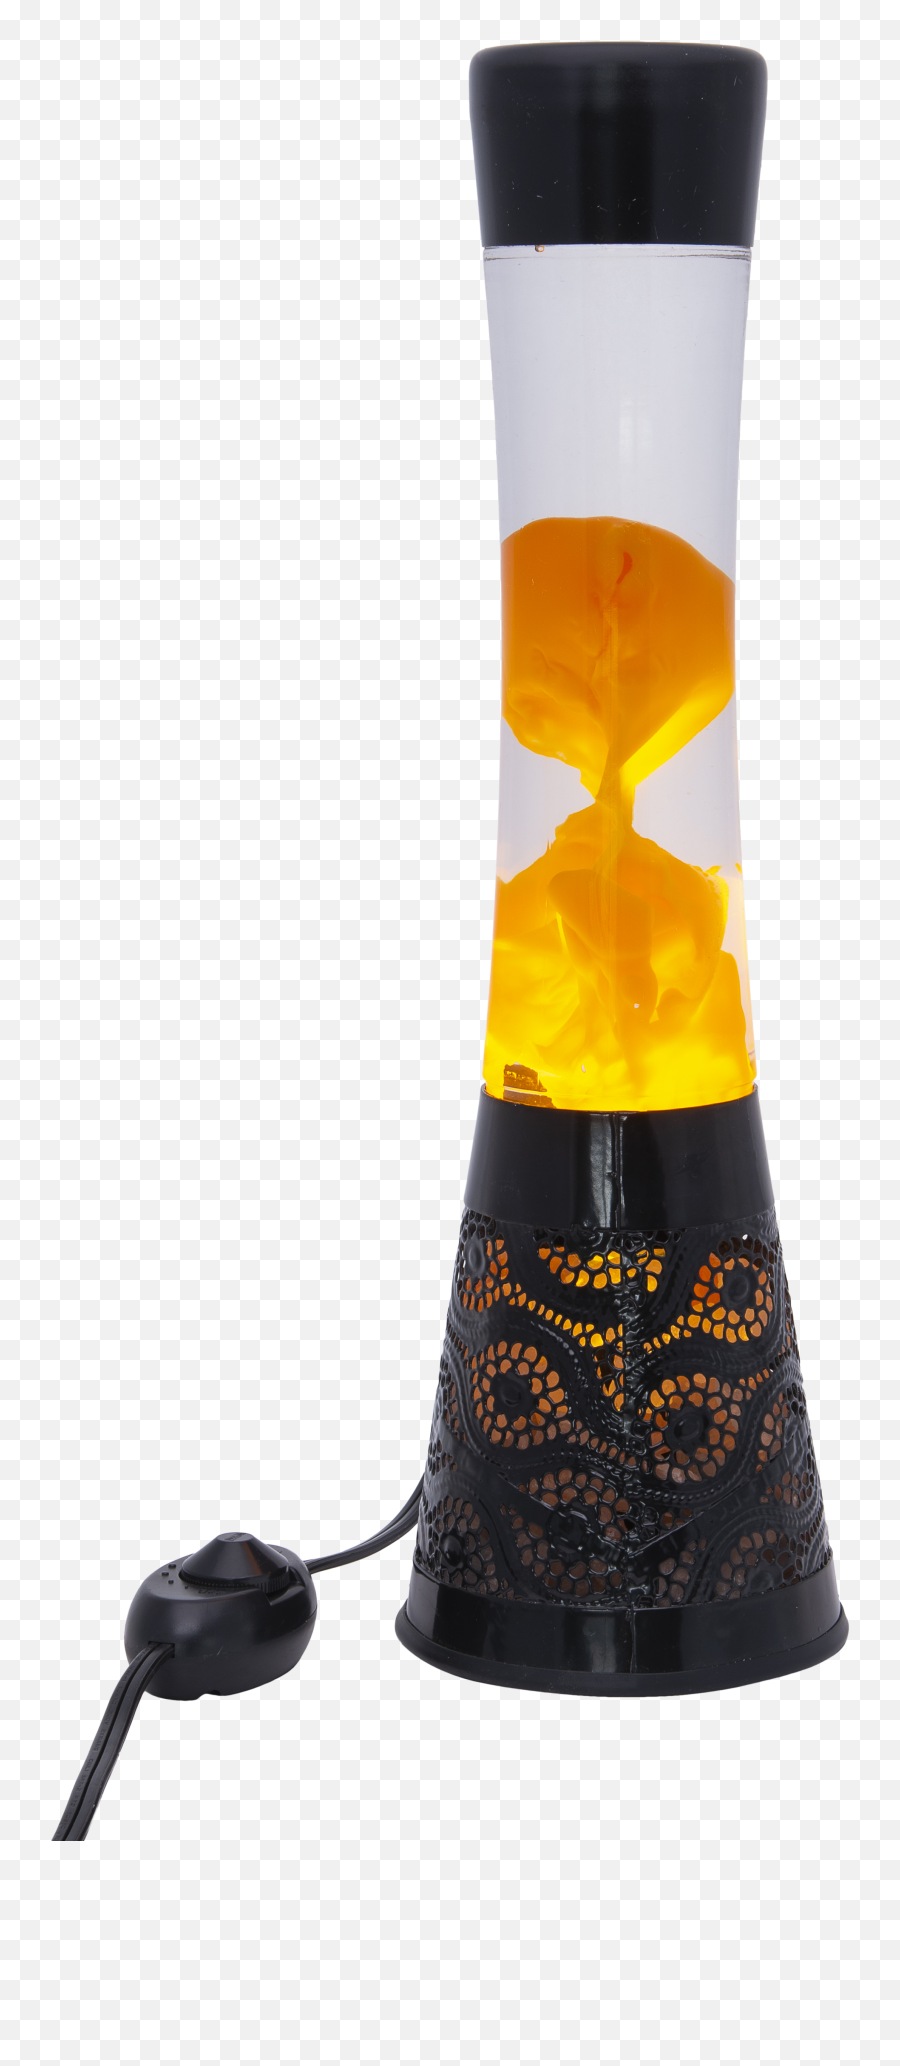 Himalayan Salt Lava Lamp - Himalayan Salt Lava Lamp Png,Lava Lamp Png